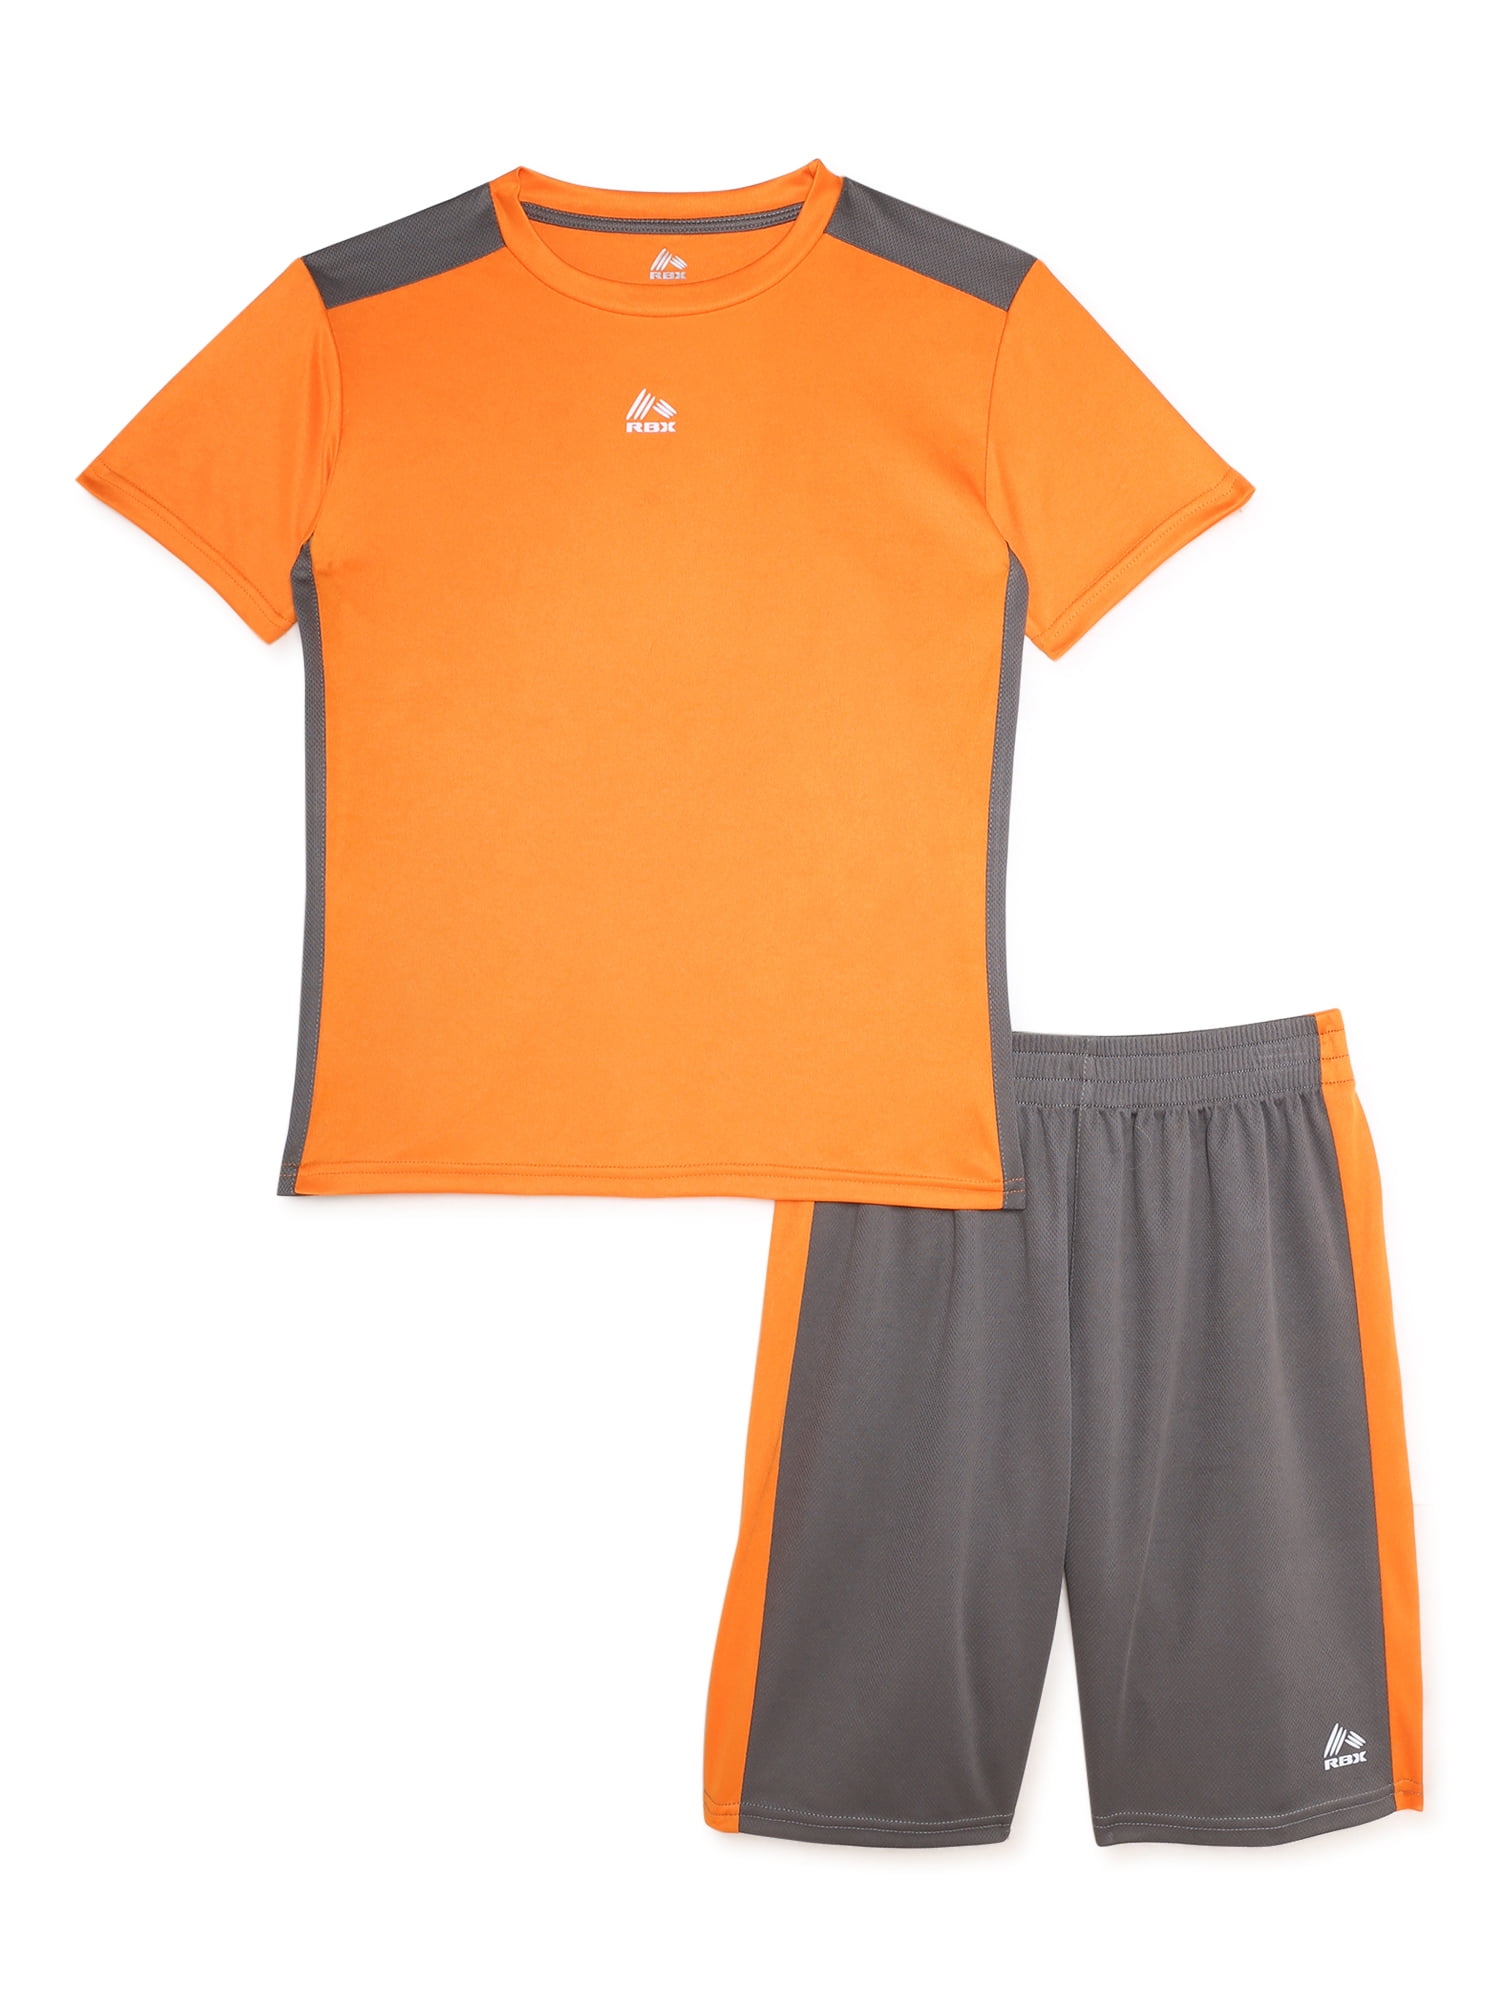 Boys T-Shirt & Shorts 2 Piece Set Kids Clothes Ages 4-14 Years Summer Sportswear 